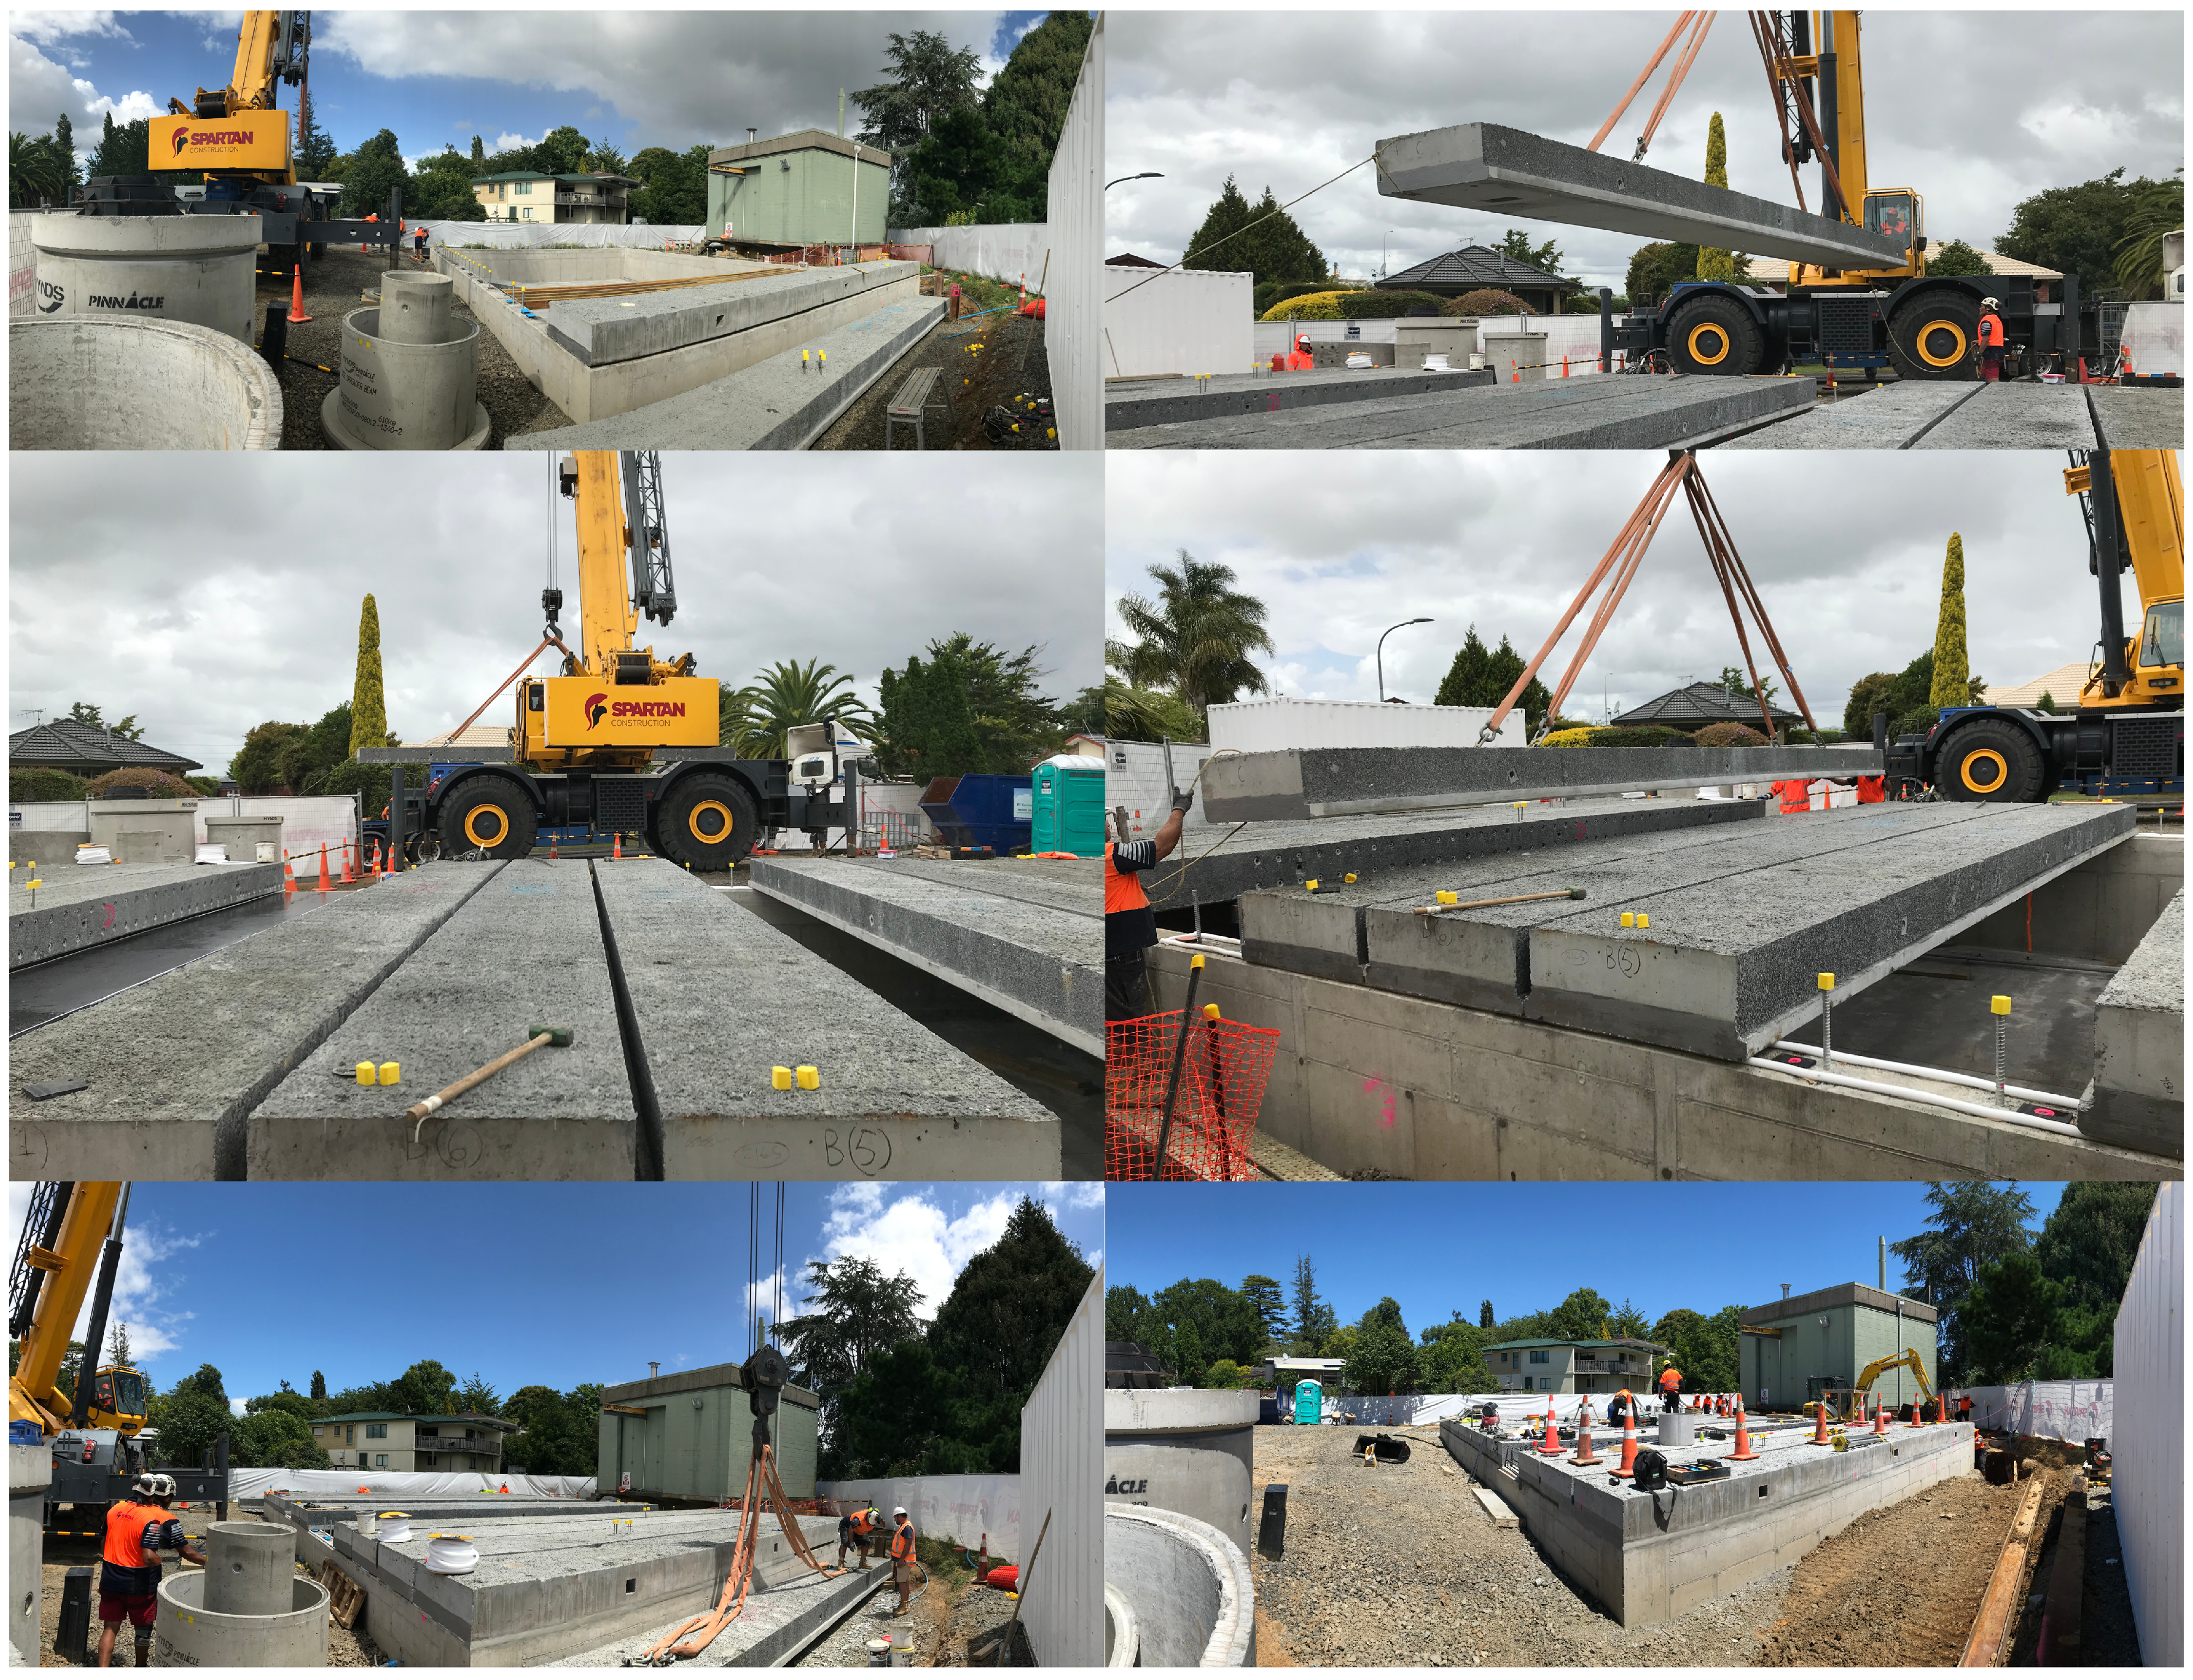 The roof slabs were installed for the new inground storage tank at Christie Avenue wastewater pump station in January 2021